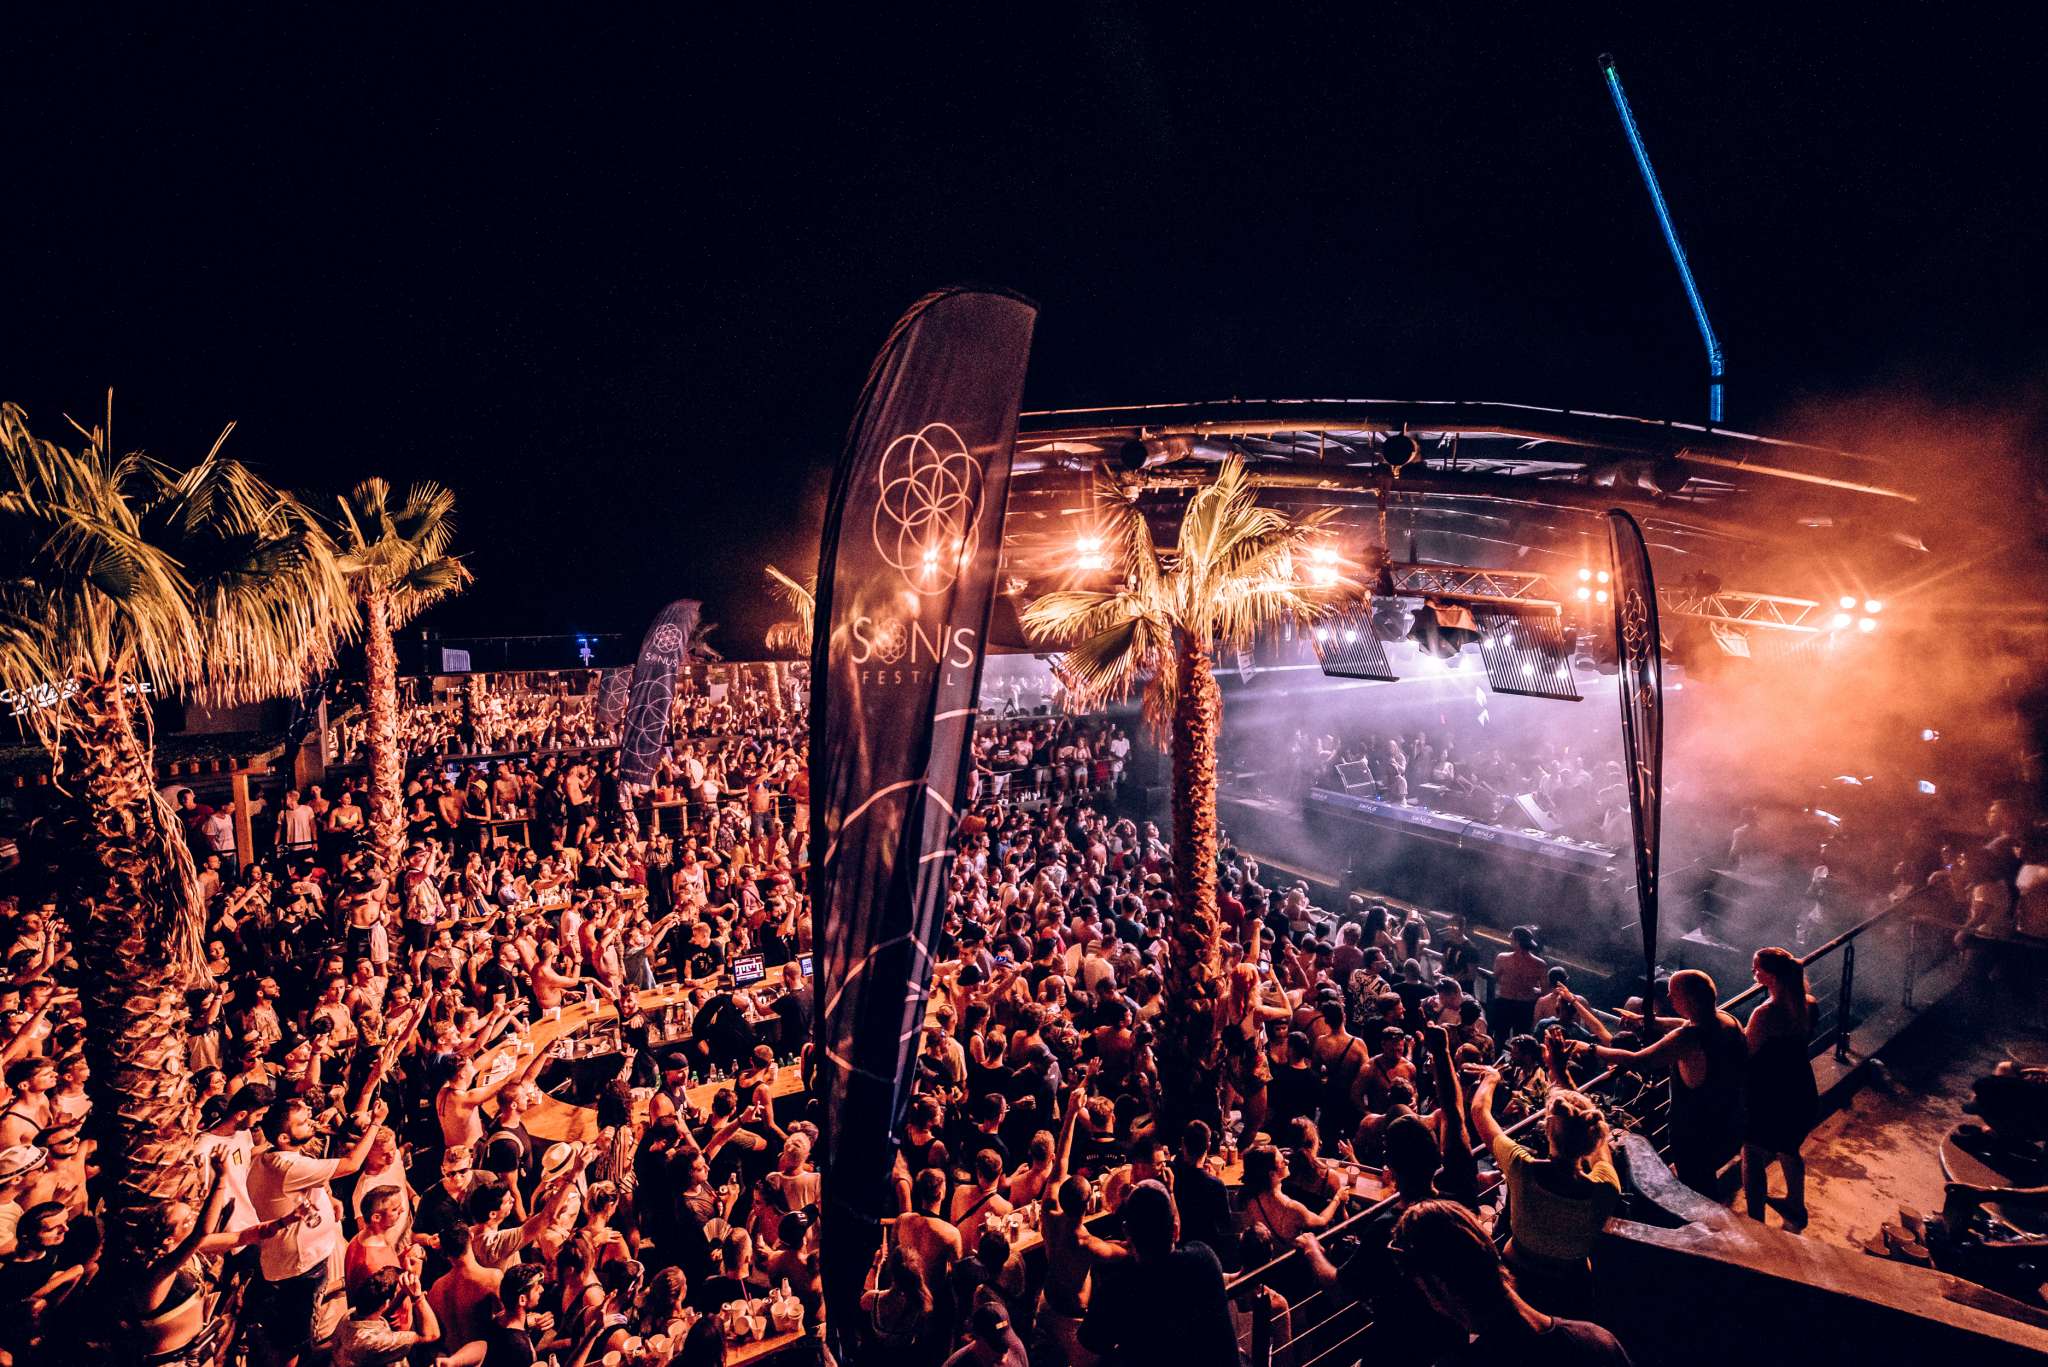 Sonus returns to trio of open-air beach clubs in Croatia with more than 40 headliners for 2022